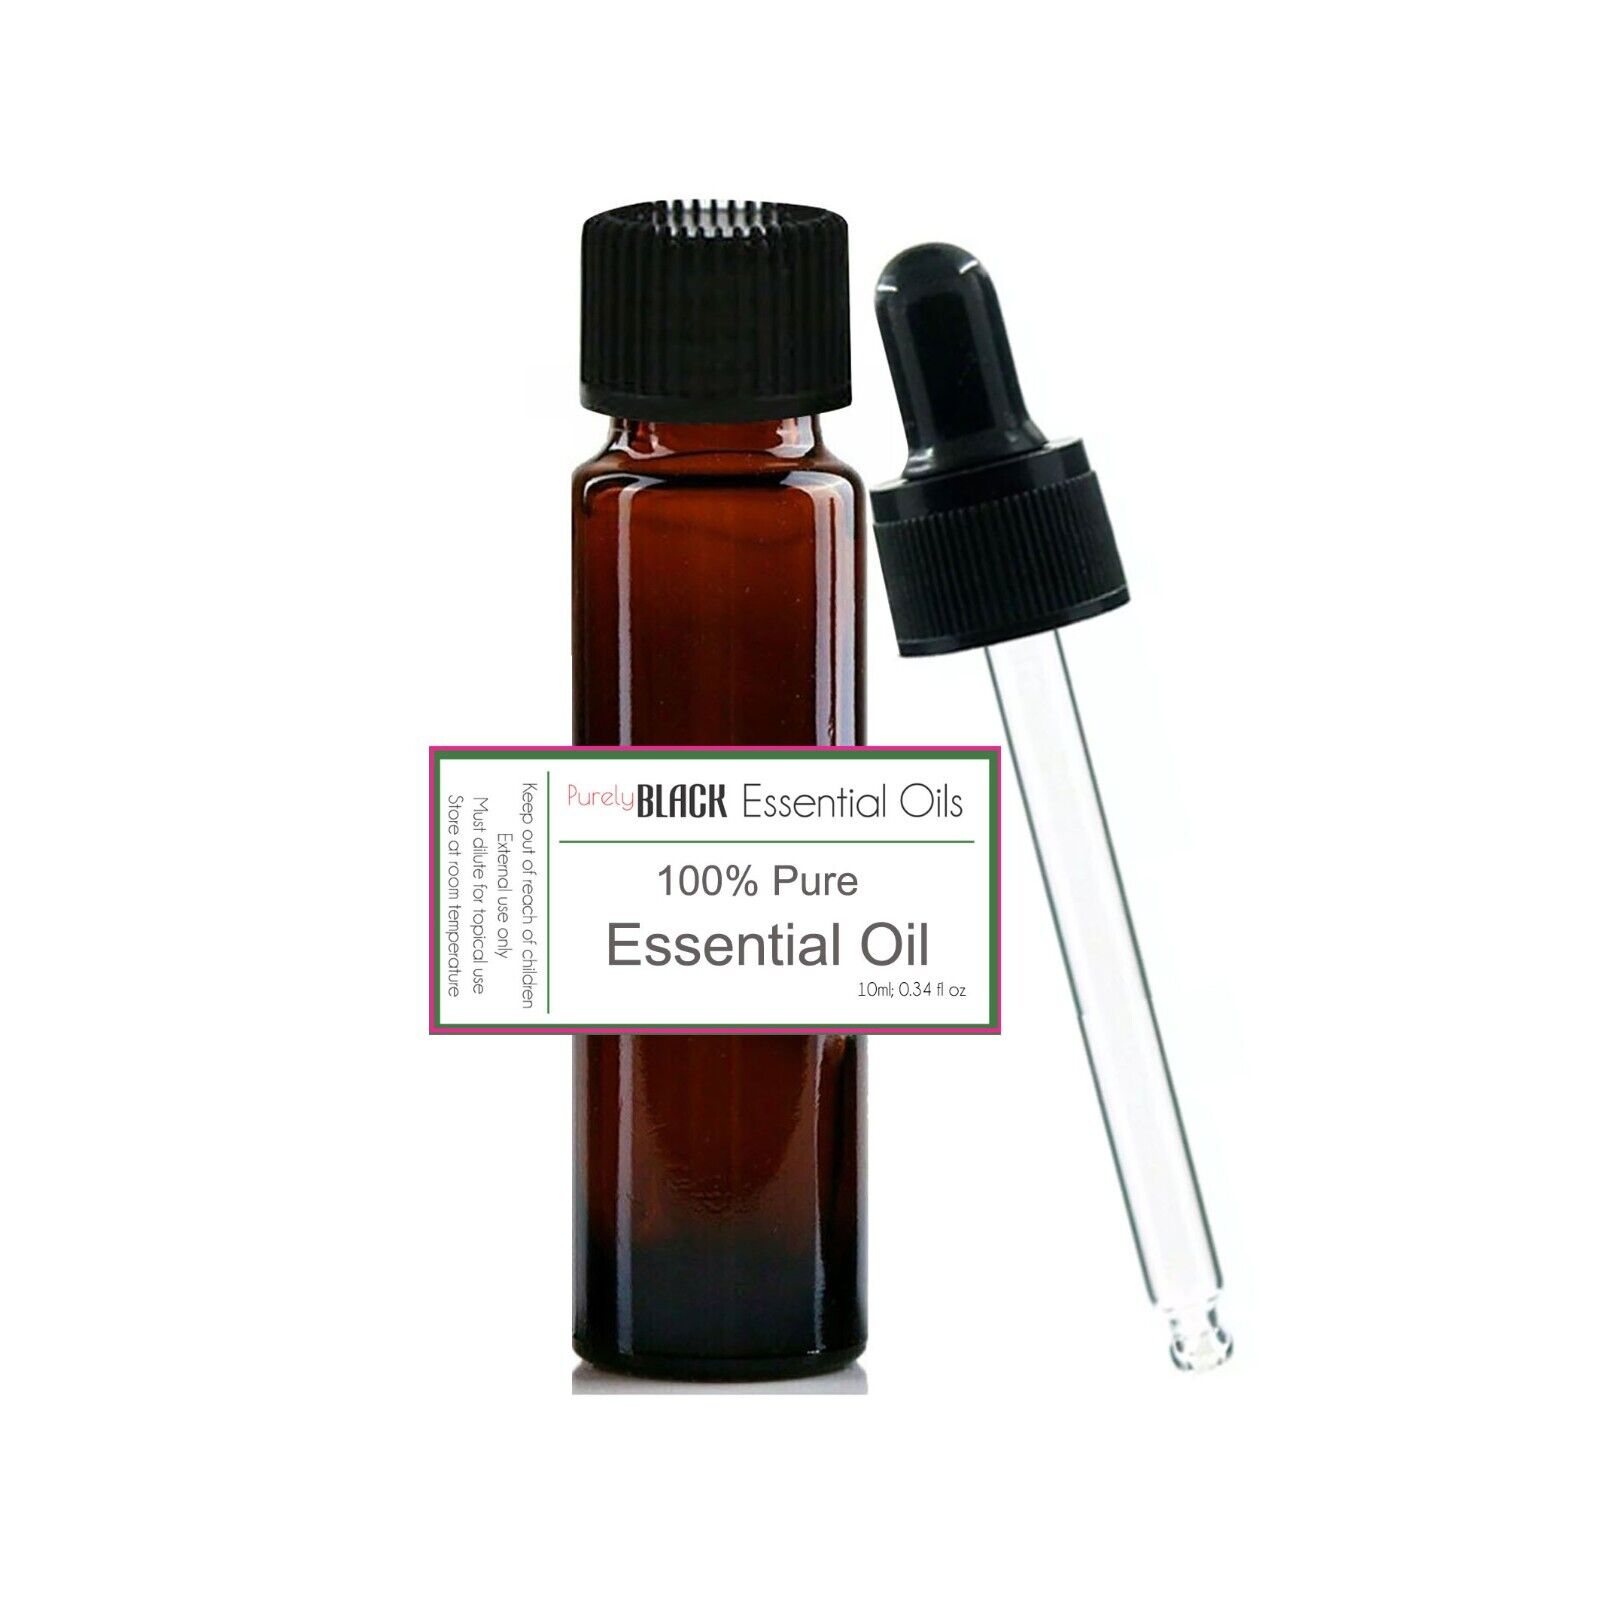 Balancing Essential Oils Blend 10ml [The Root Chakra] Aormatherapy Essential Oils Yoga / Meditaion